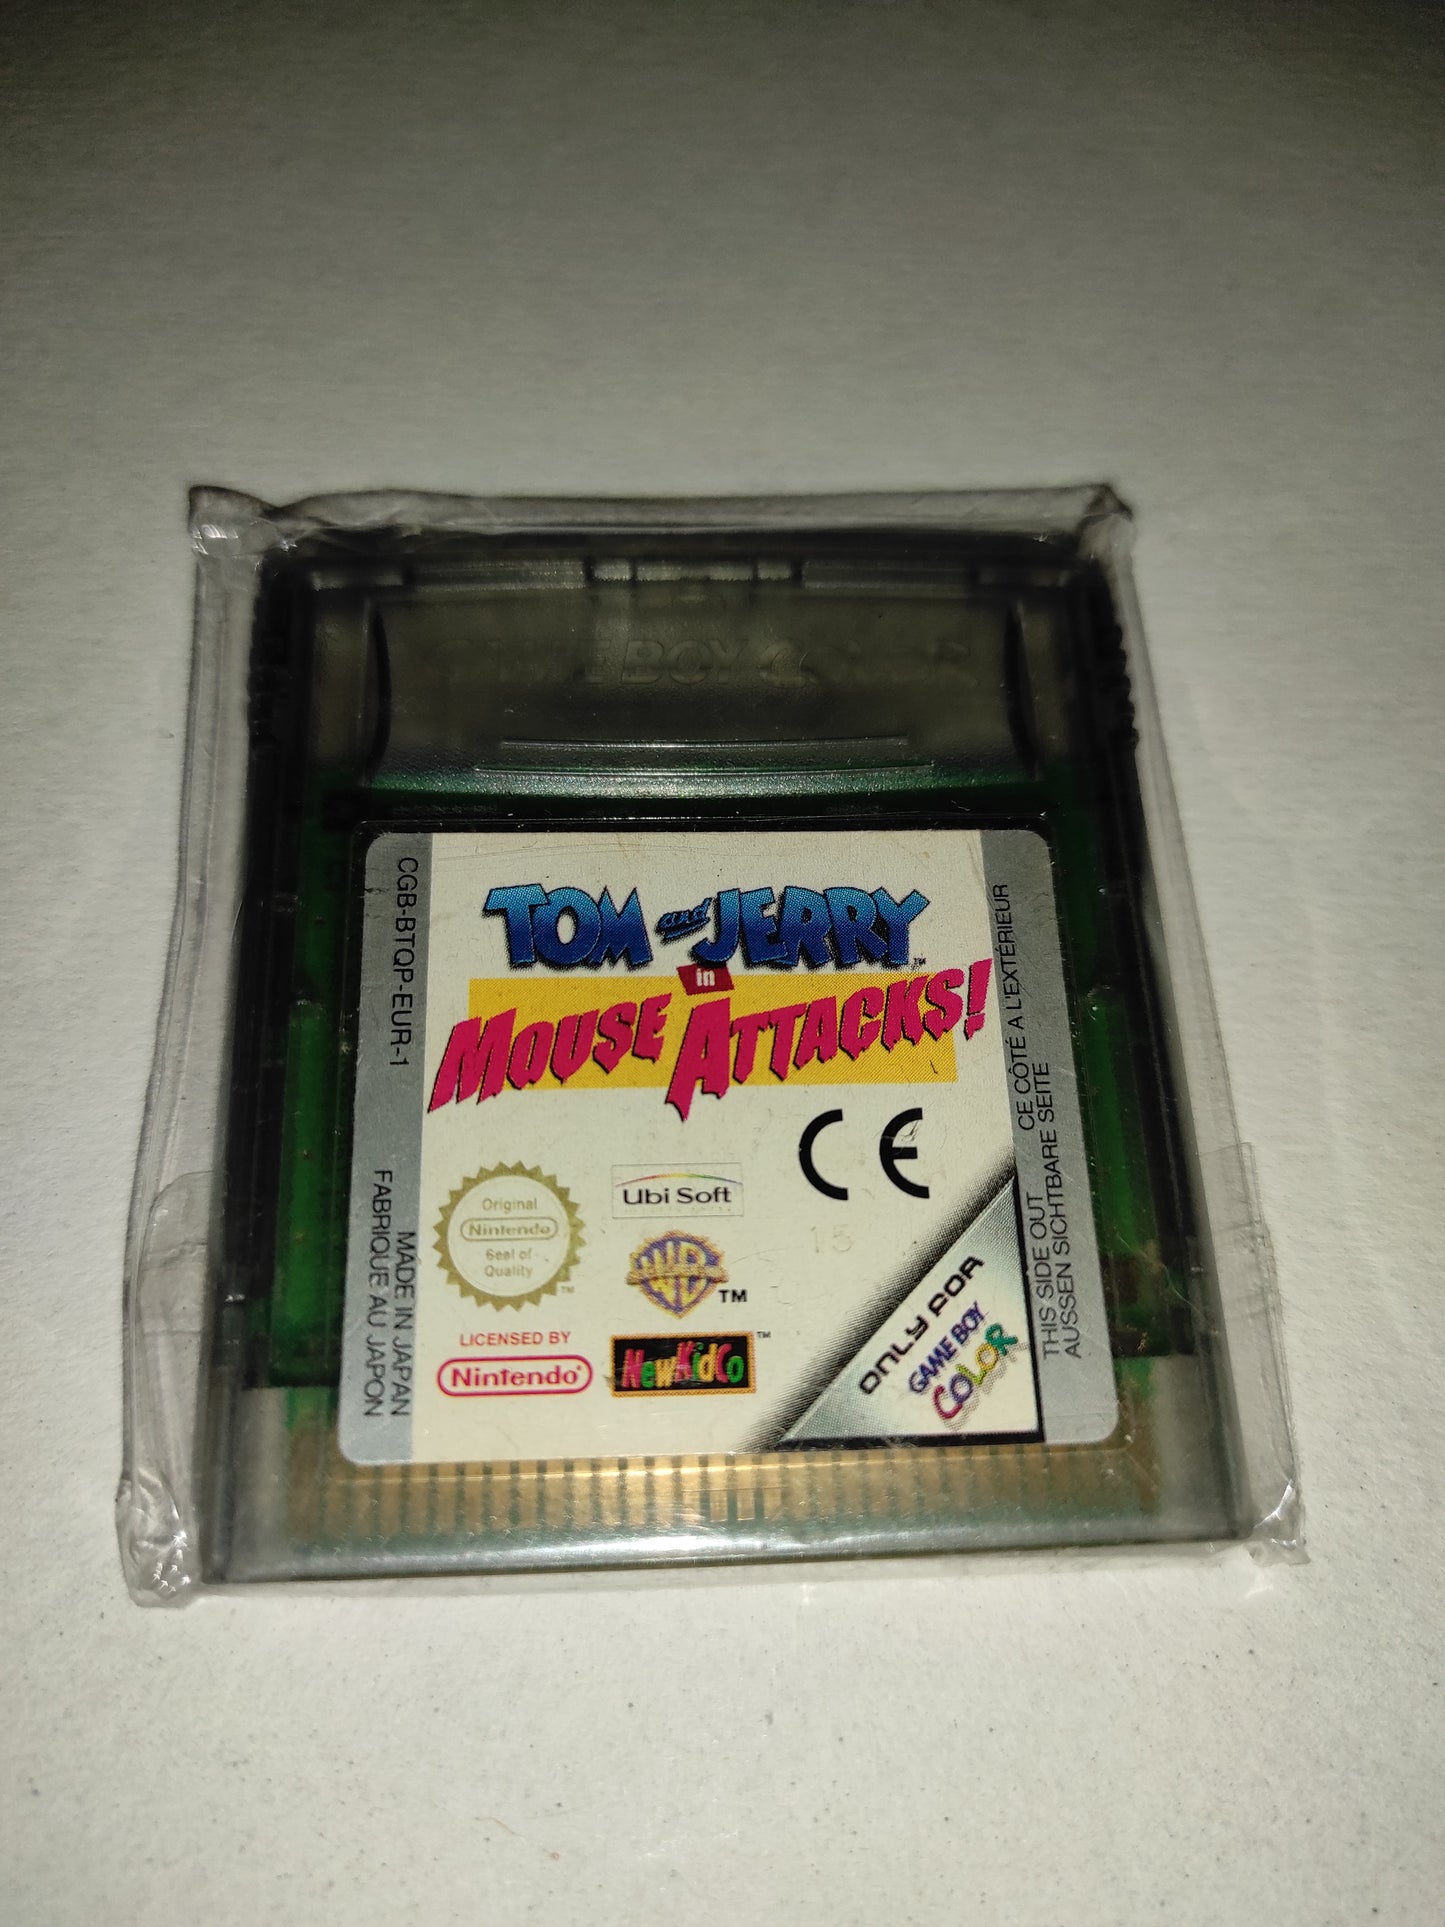 Gioco Nintendo gameboy color Tom and Jerry in mouse attacks!